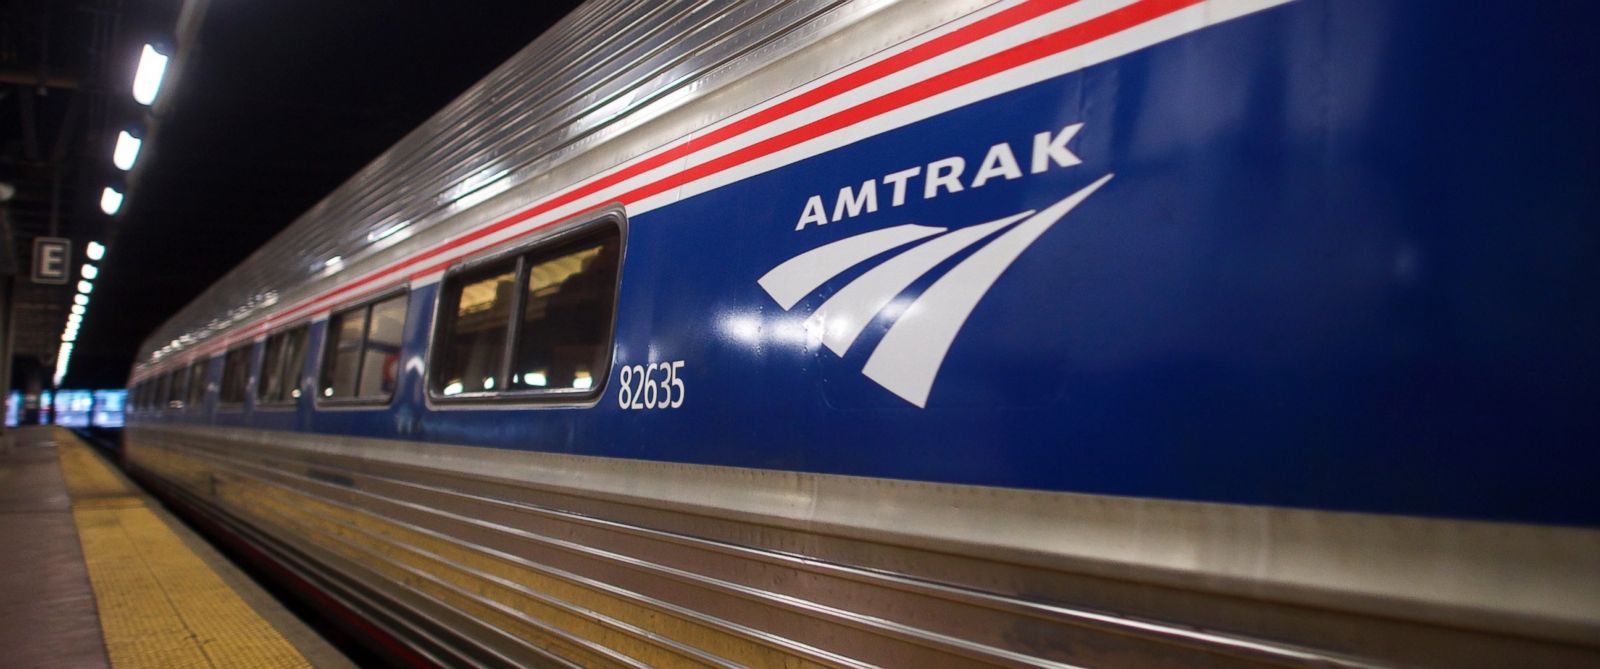 How can you contact Amtrak?